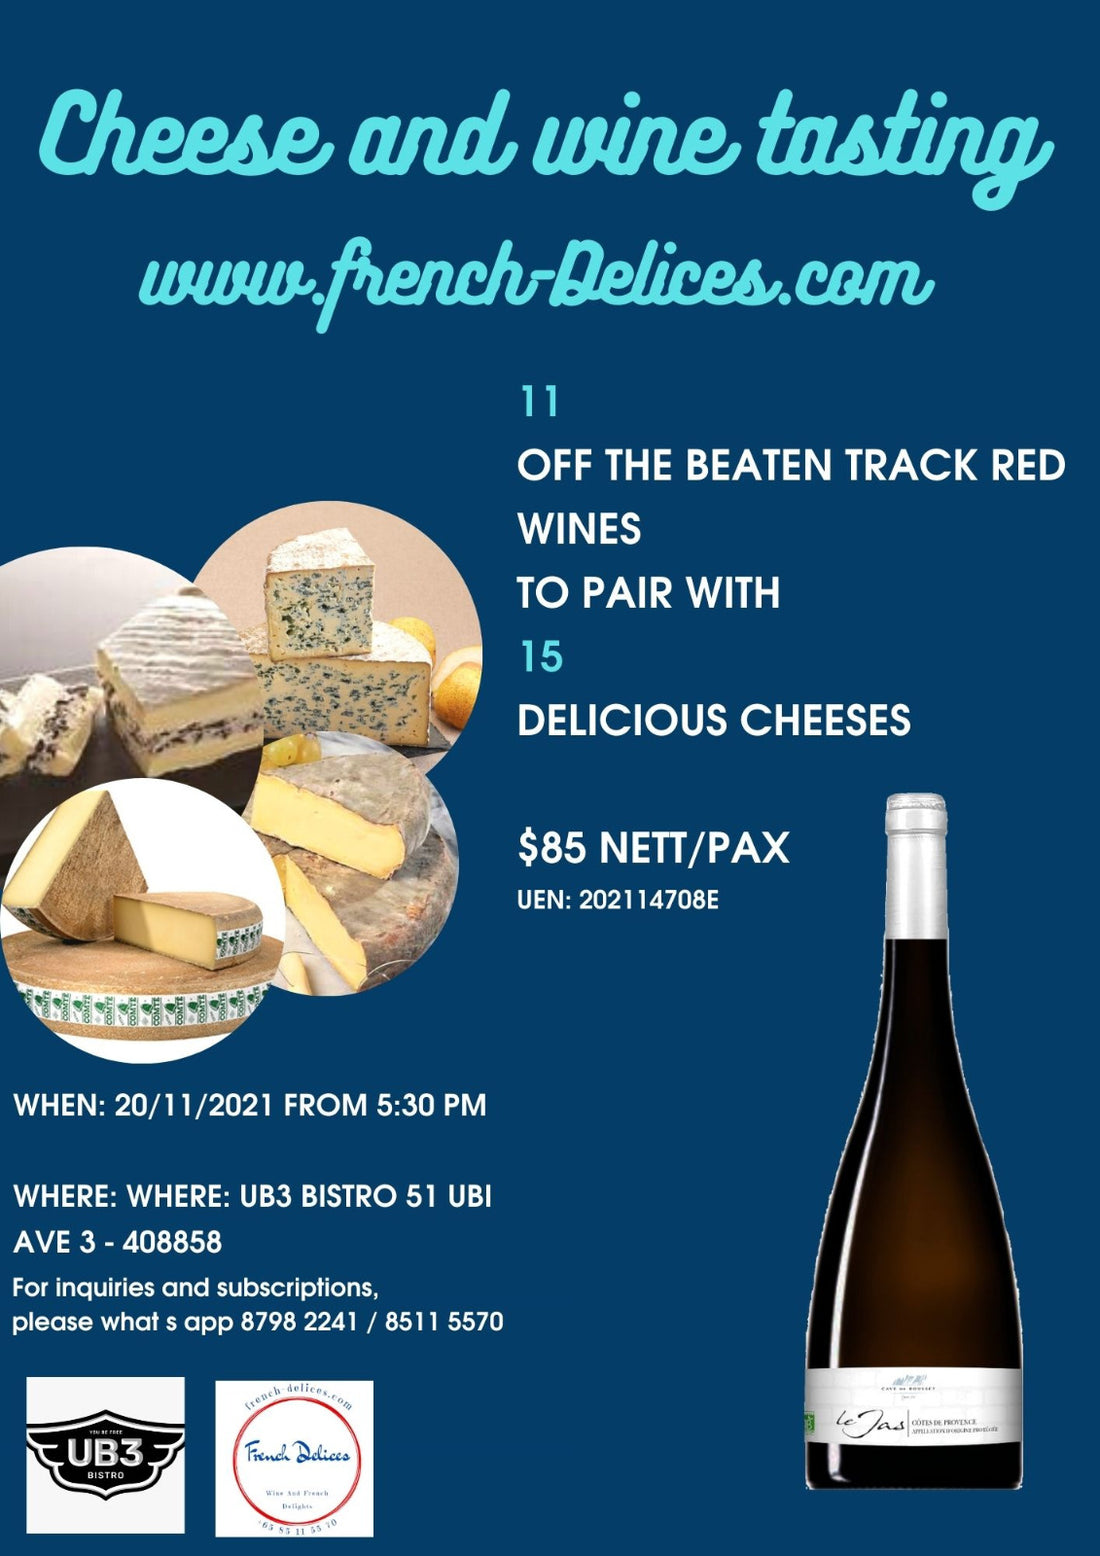 Wine and cheese: good recipe for partying !